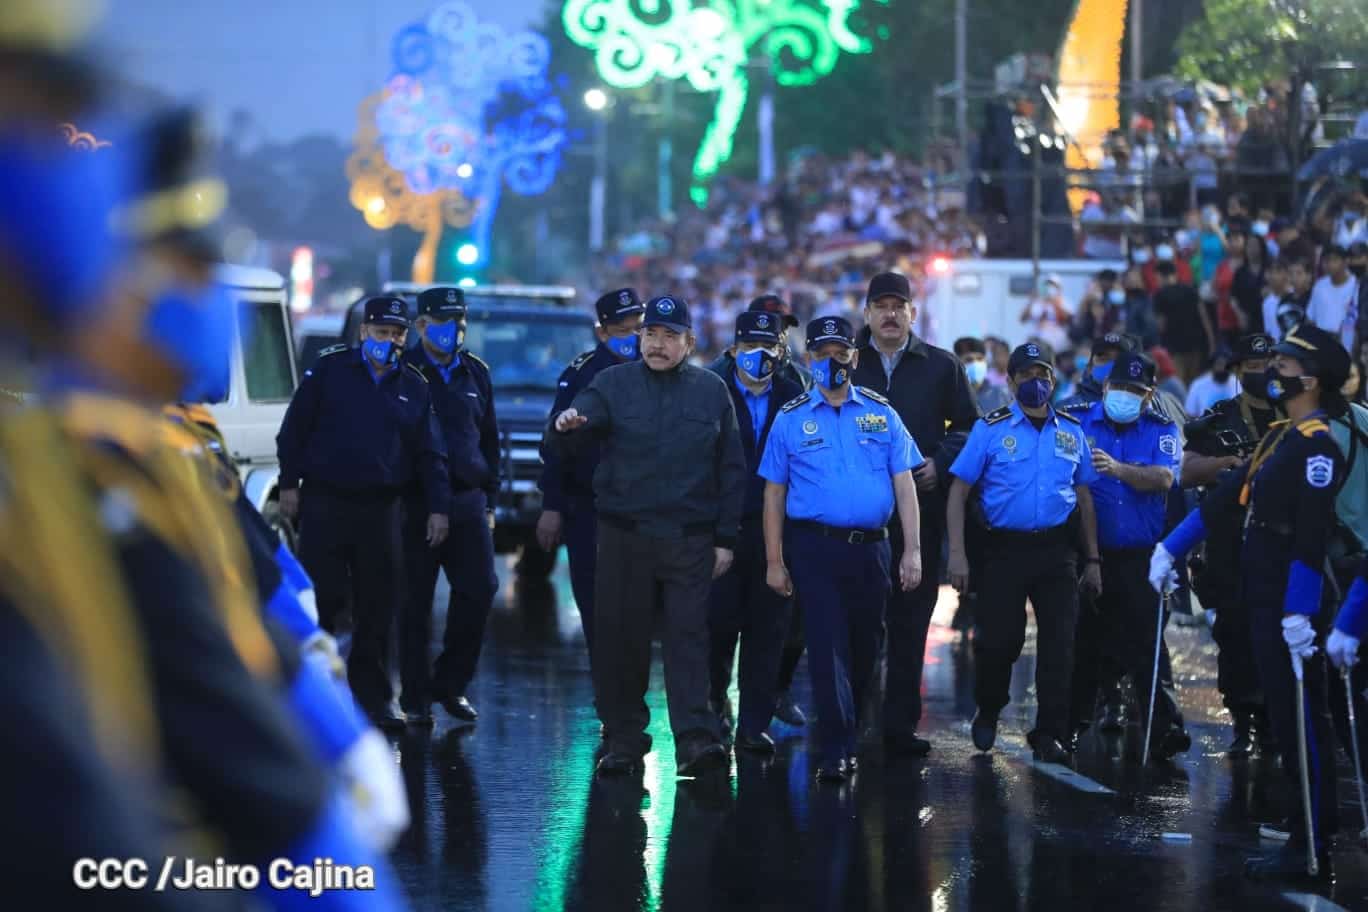 Ortega leaves the Police on "waiting list" to celebrate 43rd anniversary